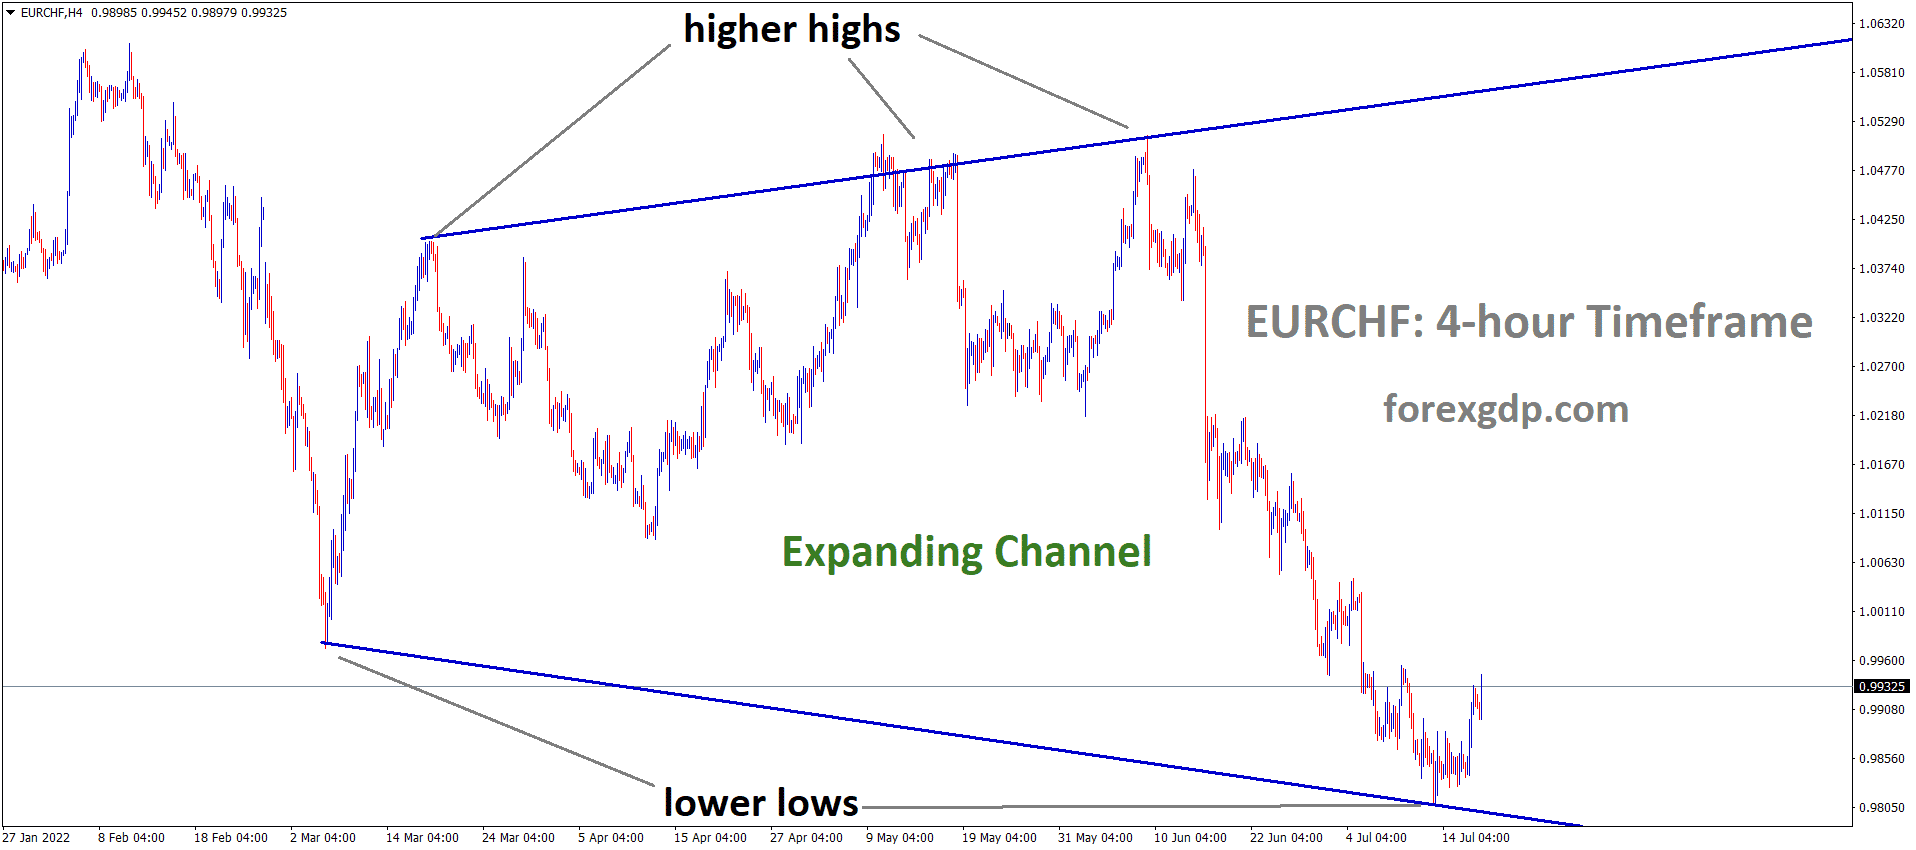 EURCHF H4 TF Analysis Market is moving in an Expanding channel and the Market has rebounded from the lower low area of the channel